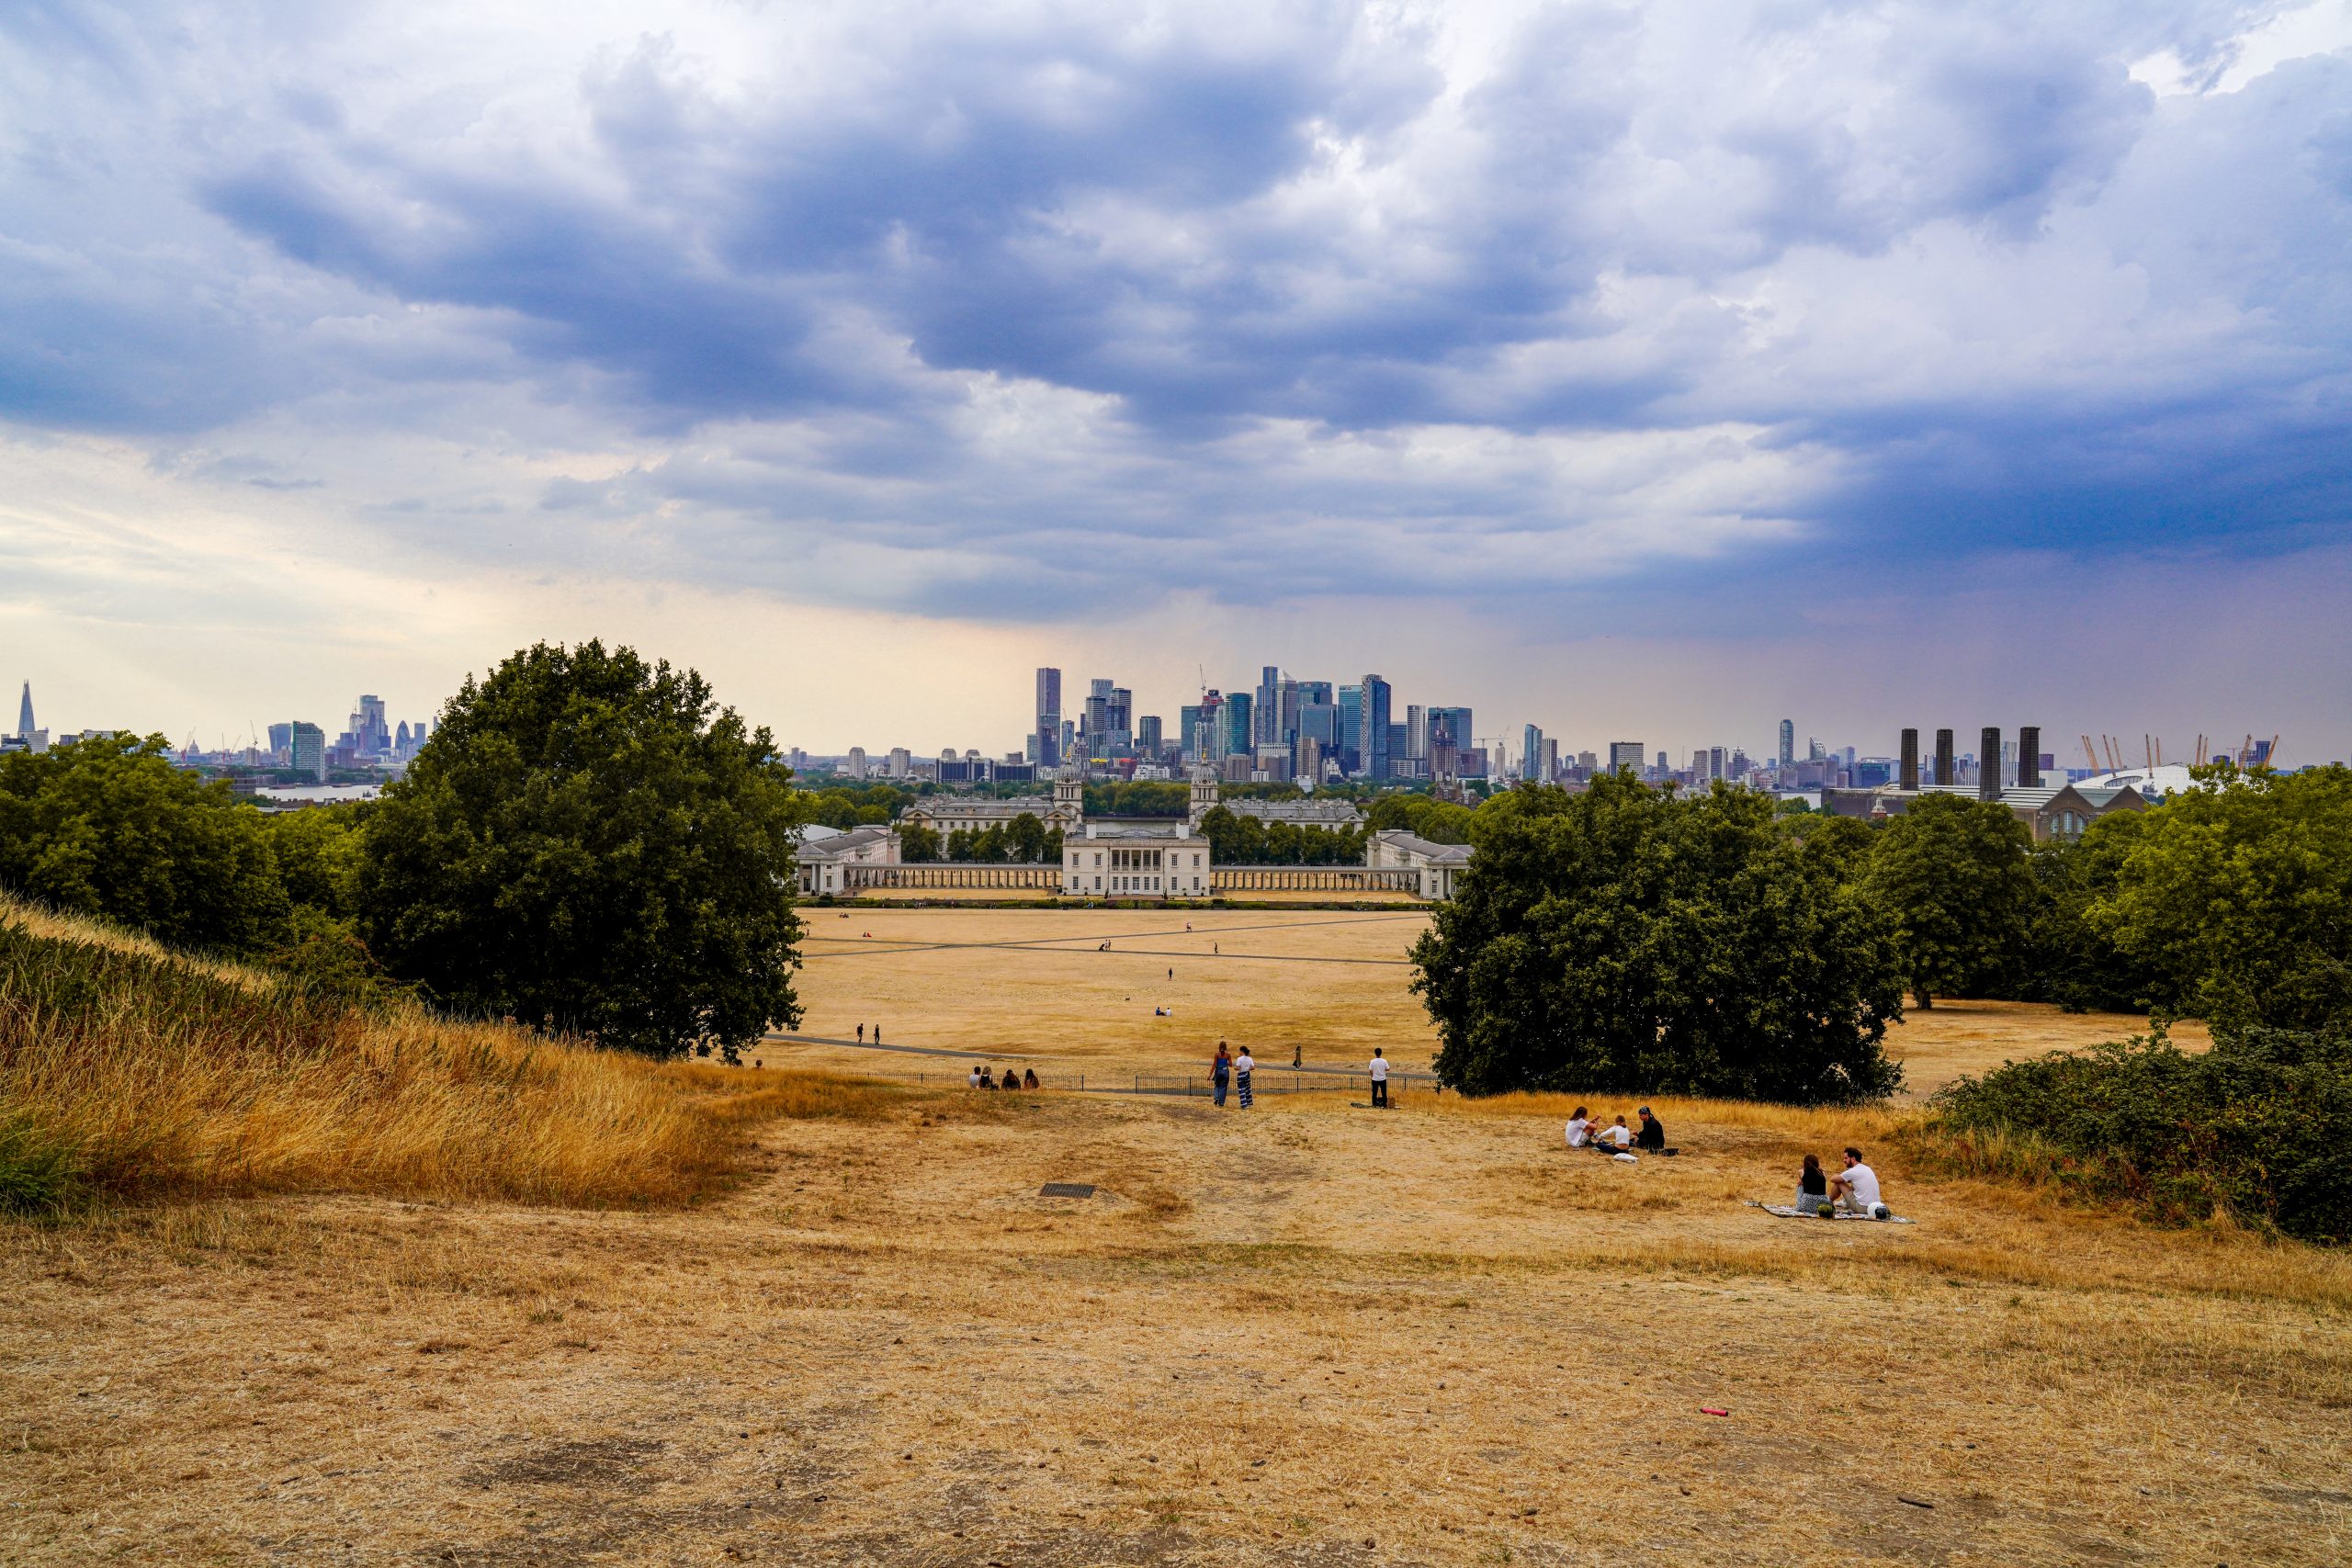 Greenwich Park - early evening of 15 August - people watch storm clouds gather over London. Copyright: Alisdare Hickson/Flickr.